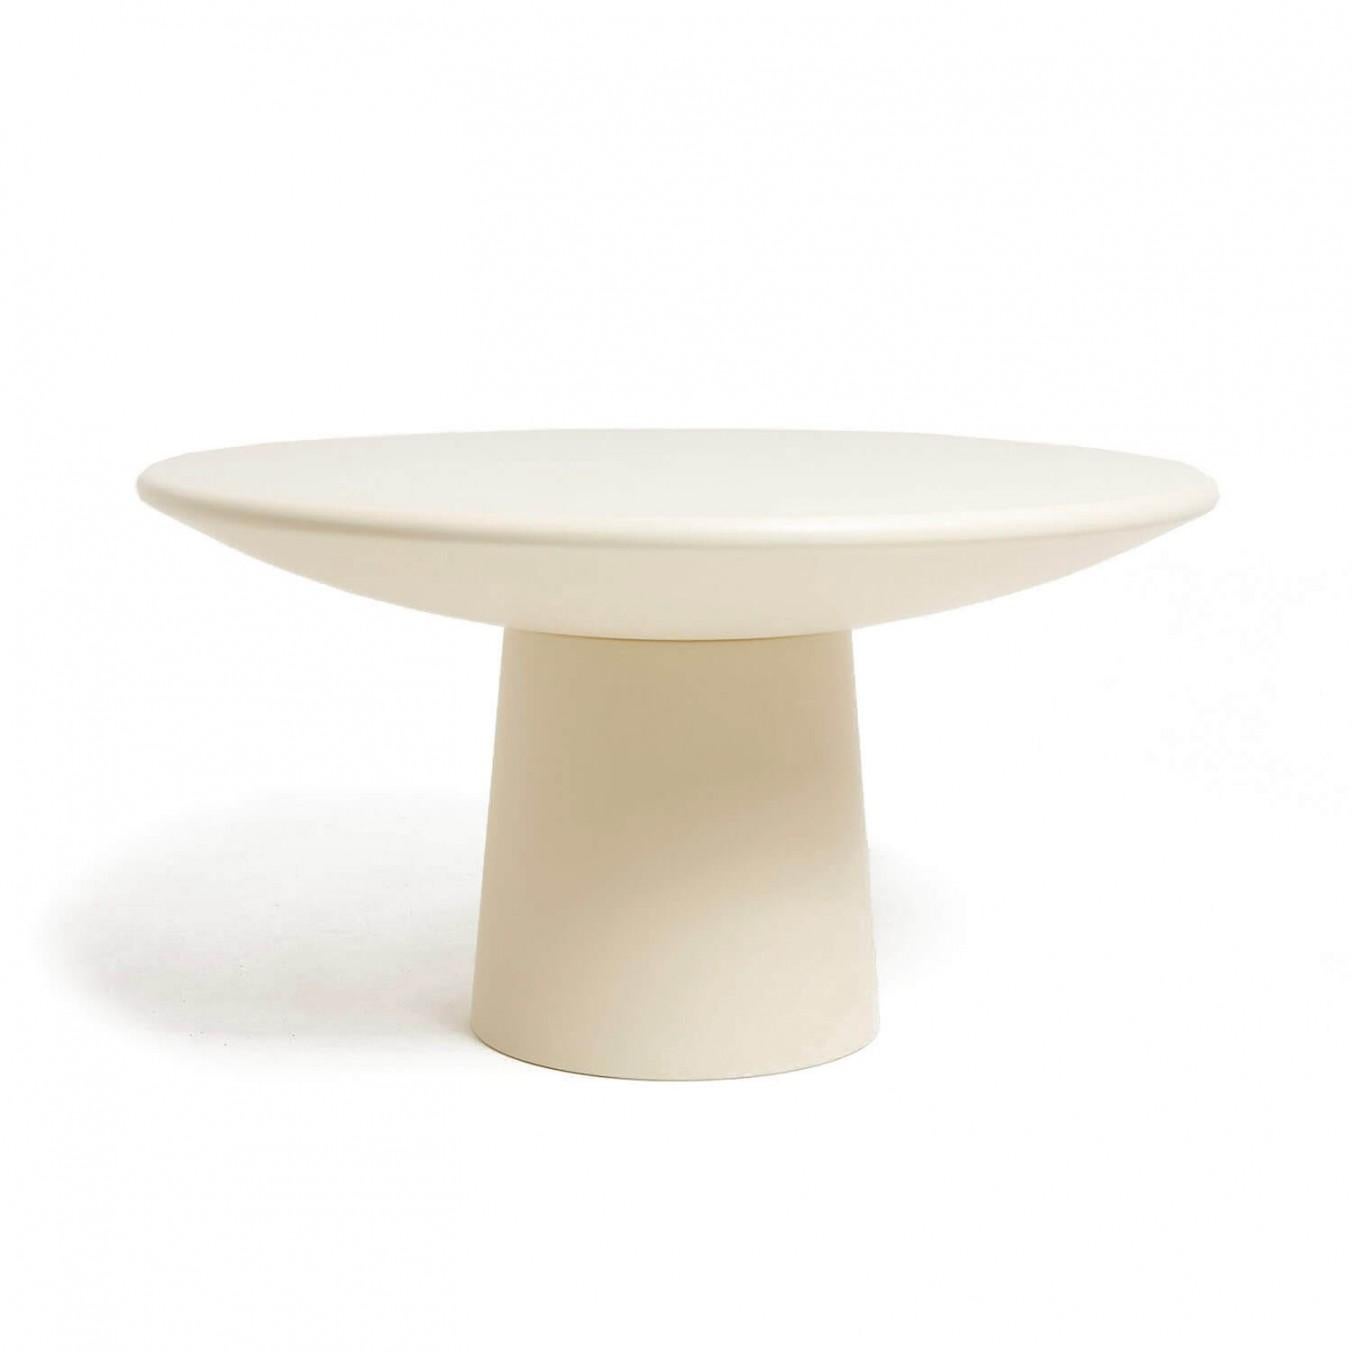 Contemporary fiberglass dining table - Roly Poly dining table by Faye Toogood. This is shown in the cream fiberglass finish. 
Design: Faye Toogood
Material: Fiberglass 
Available also in raw or charcoal finish

The Roly Poly chair is the anchor